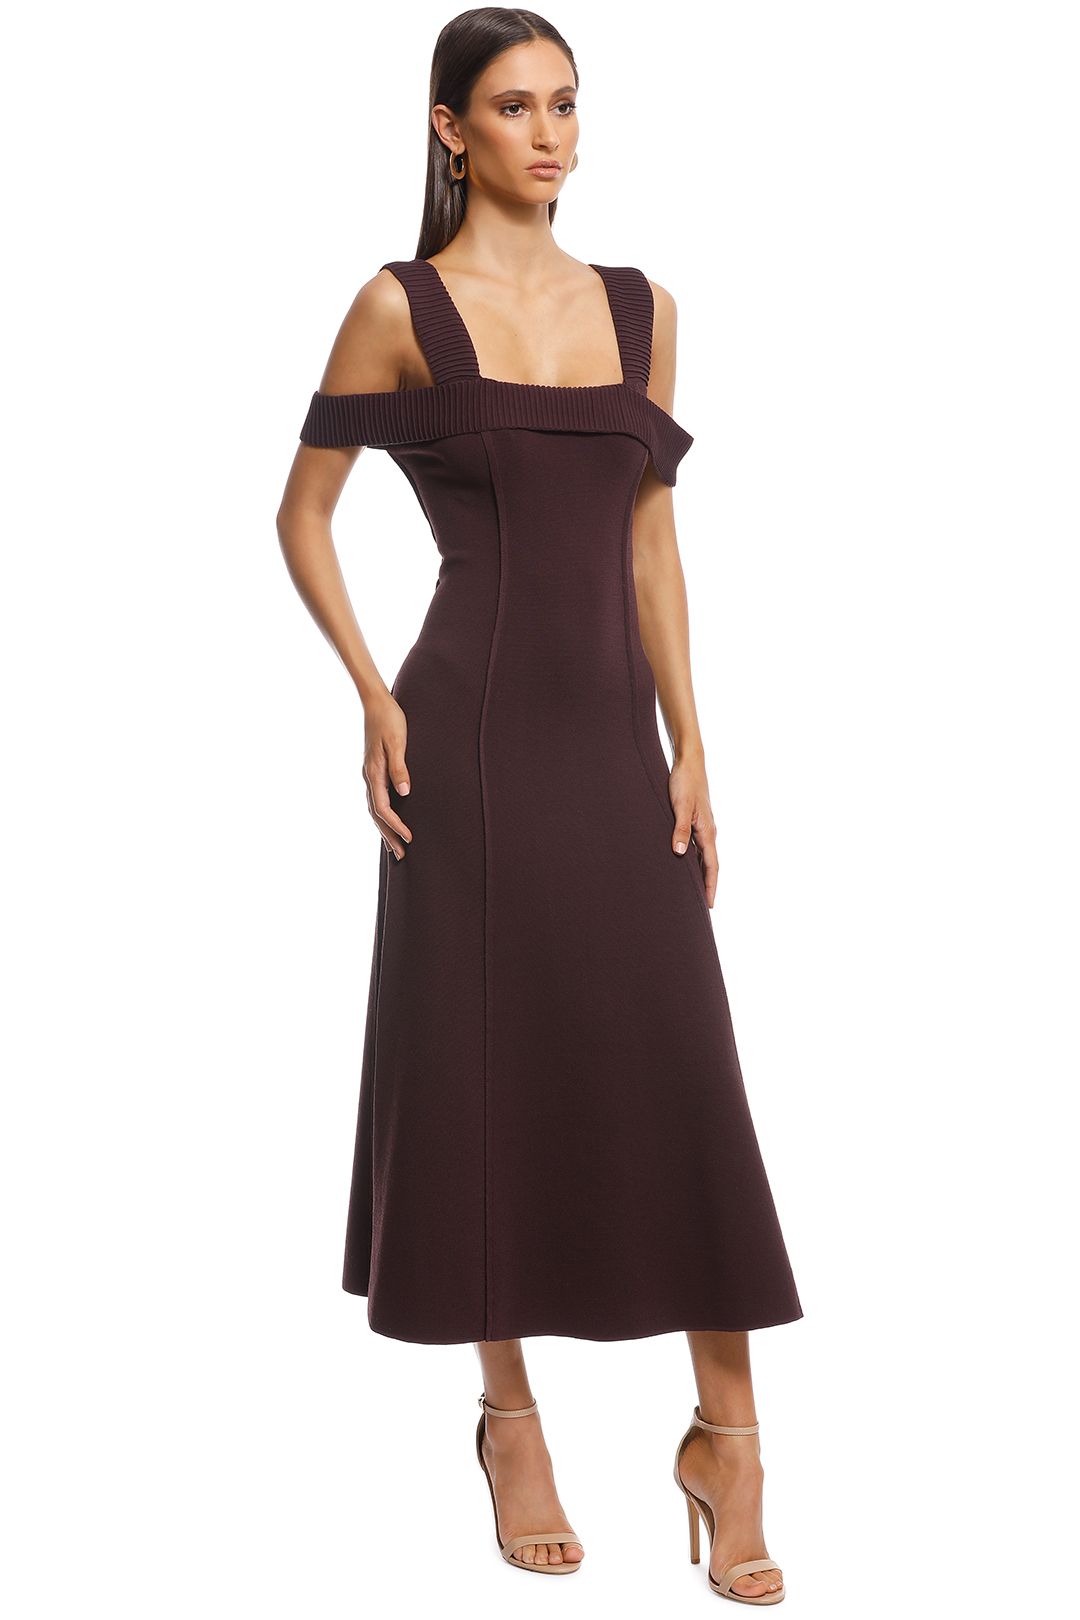 Camilla and Marc - Carole Fit and Flare Midi Dress - Burgundy - Side